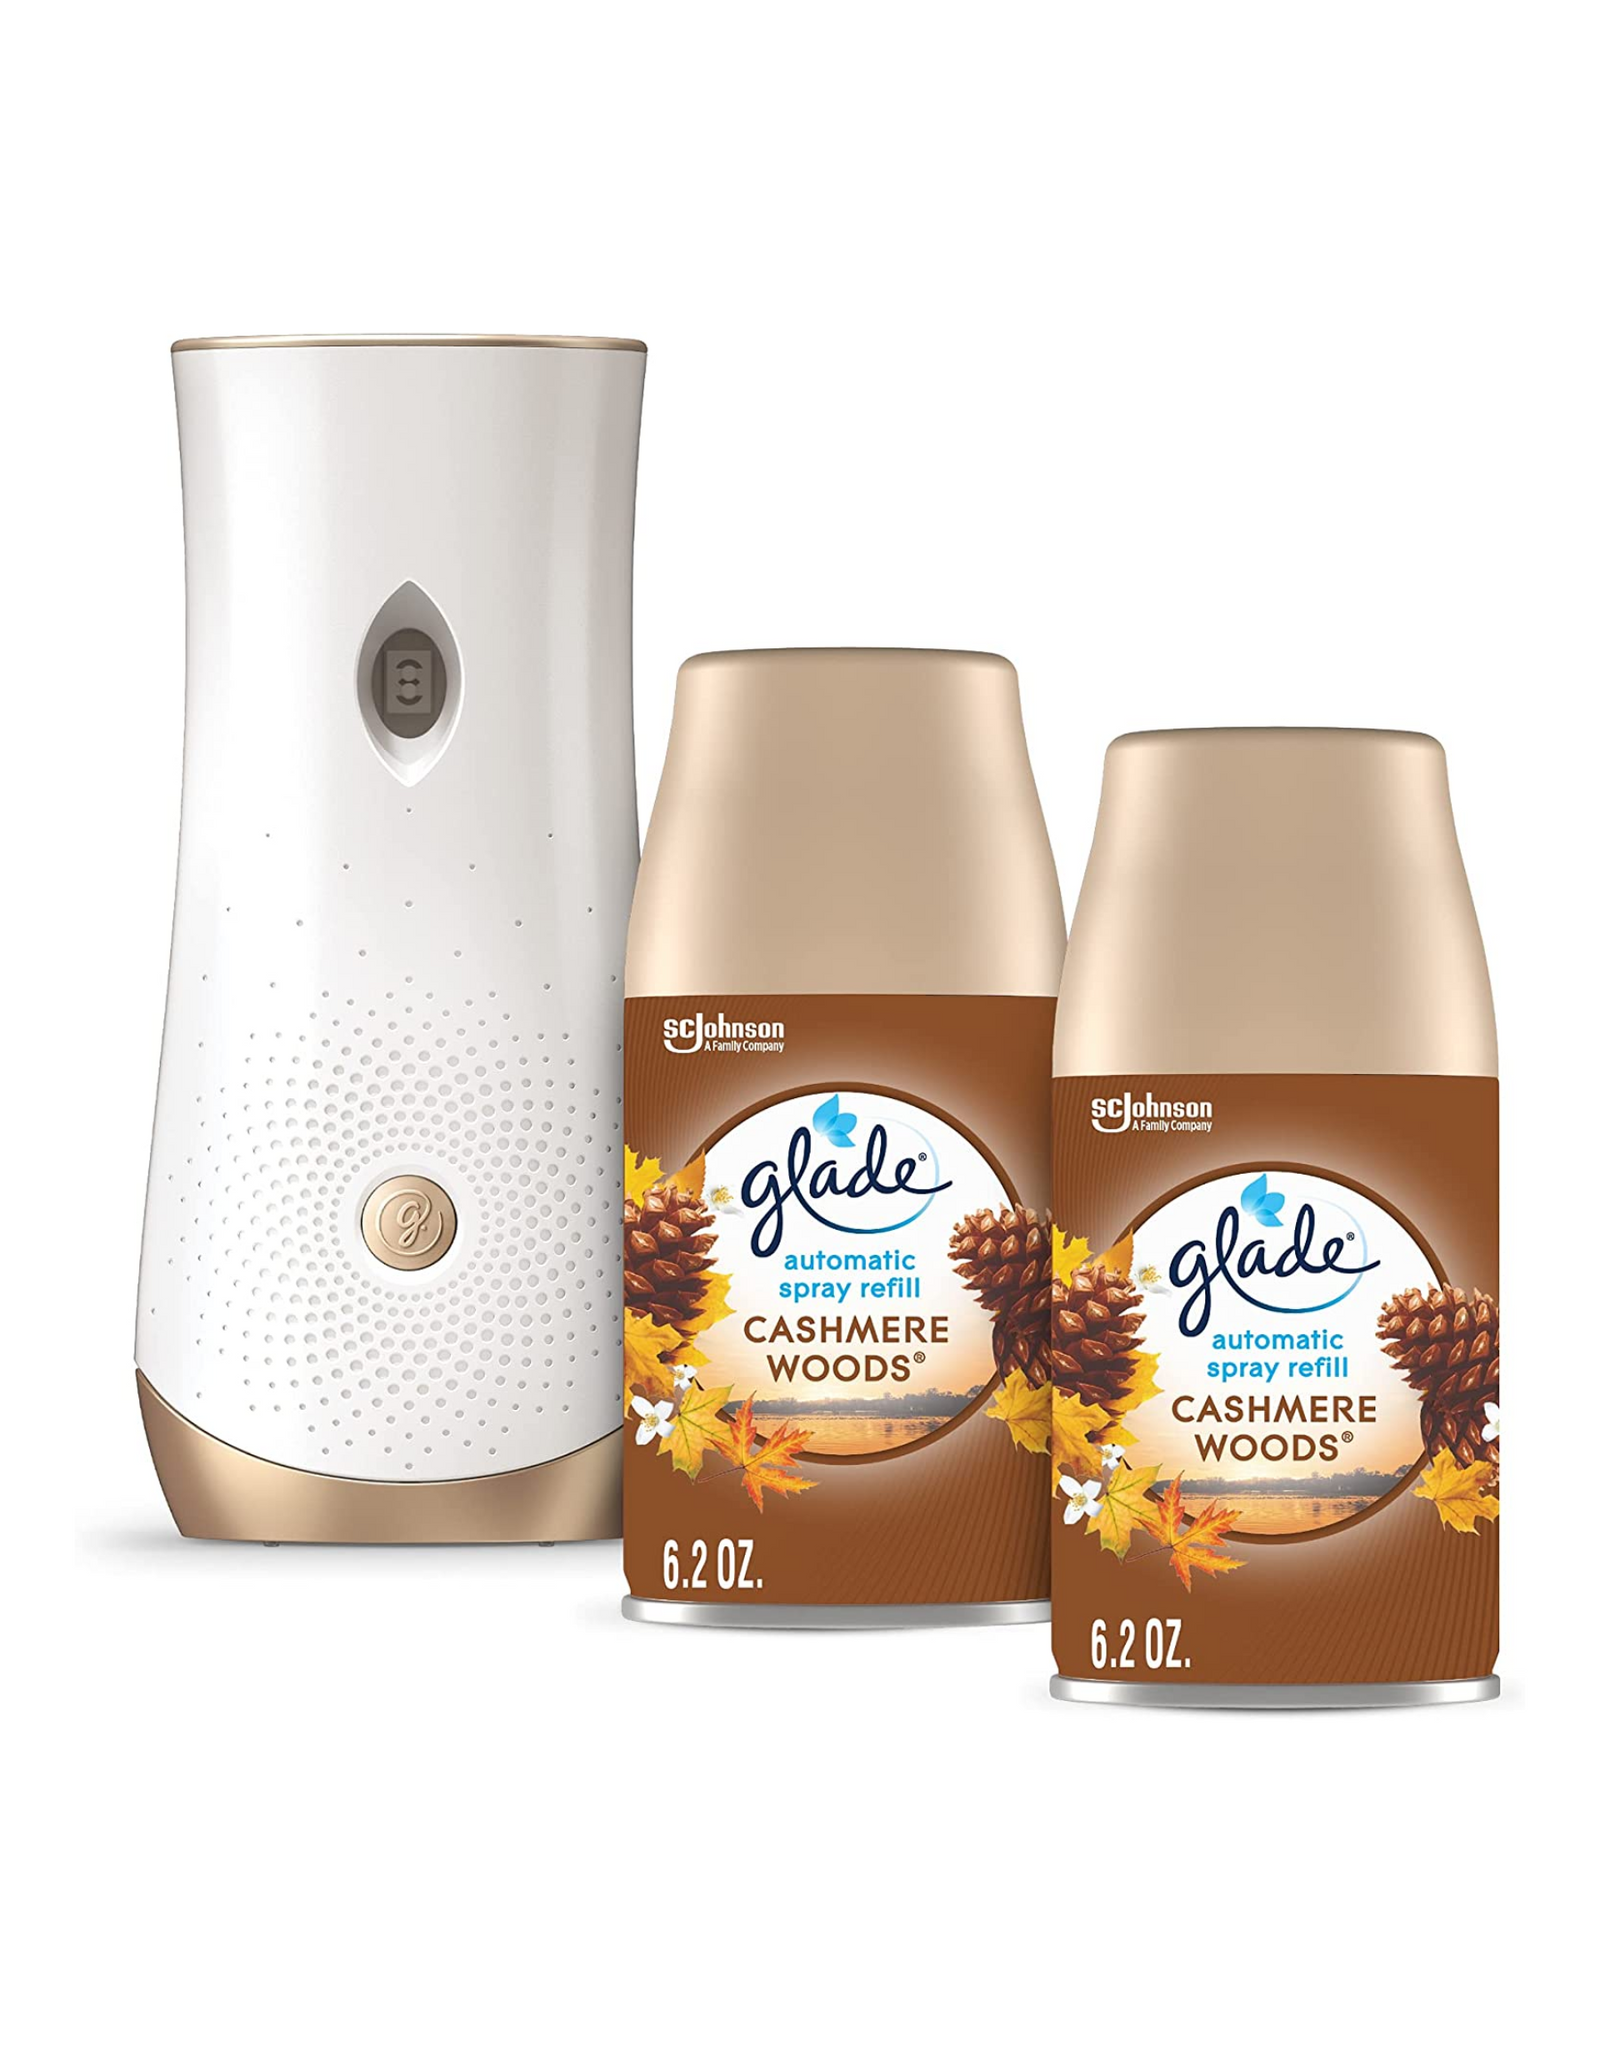 Glade Automatic Spray Refill and Holder Kit, Cashmere Woods, 6.2 oz, 2 Ct